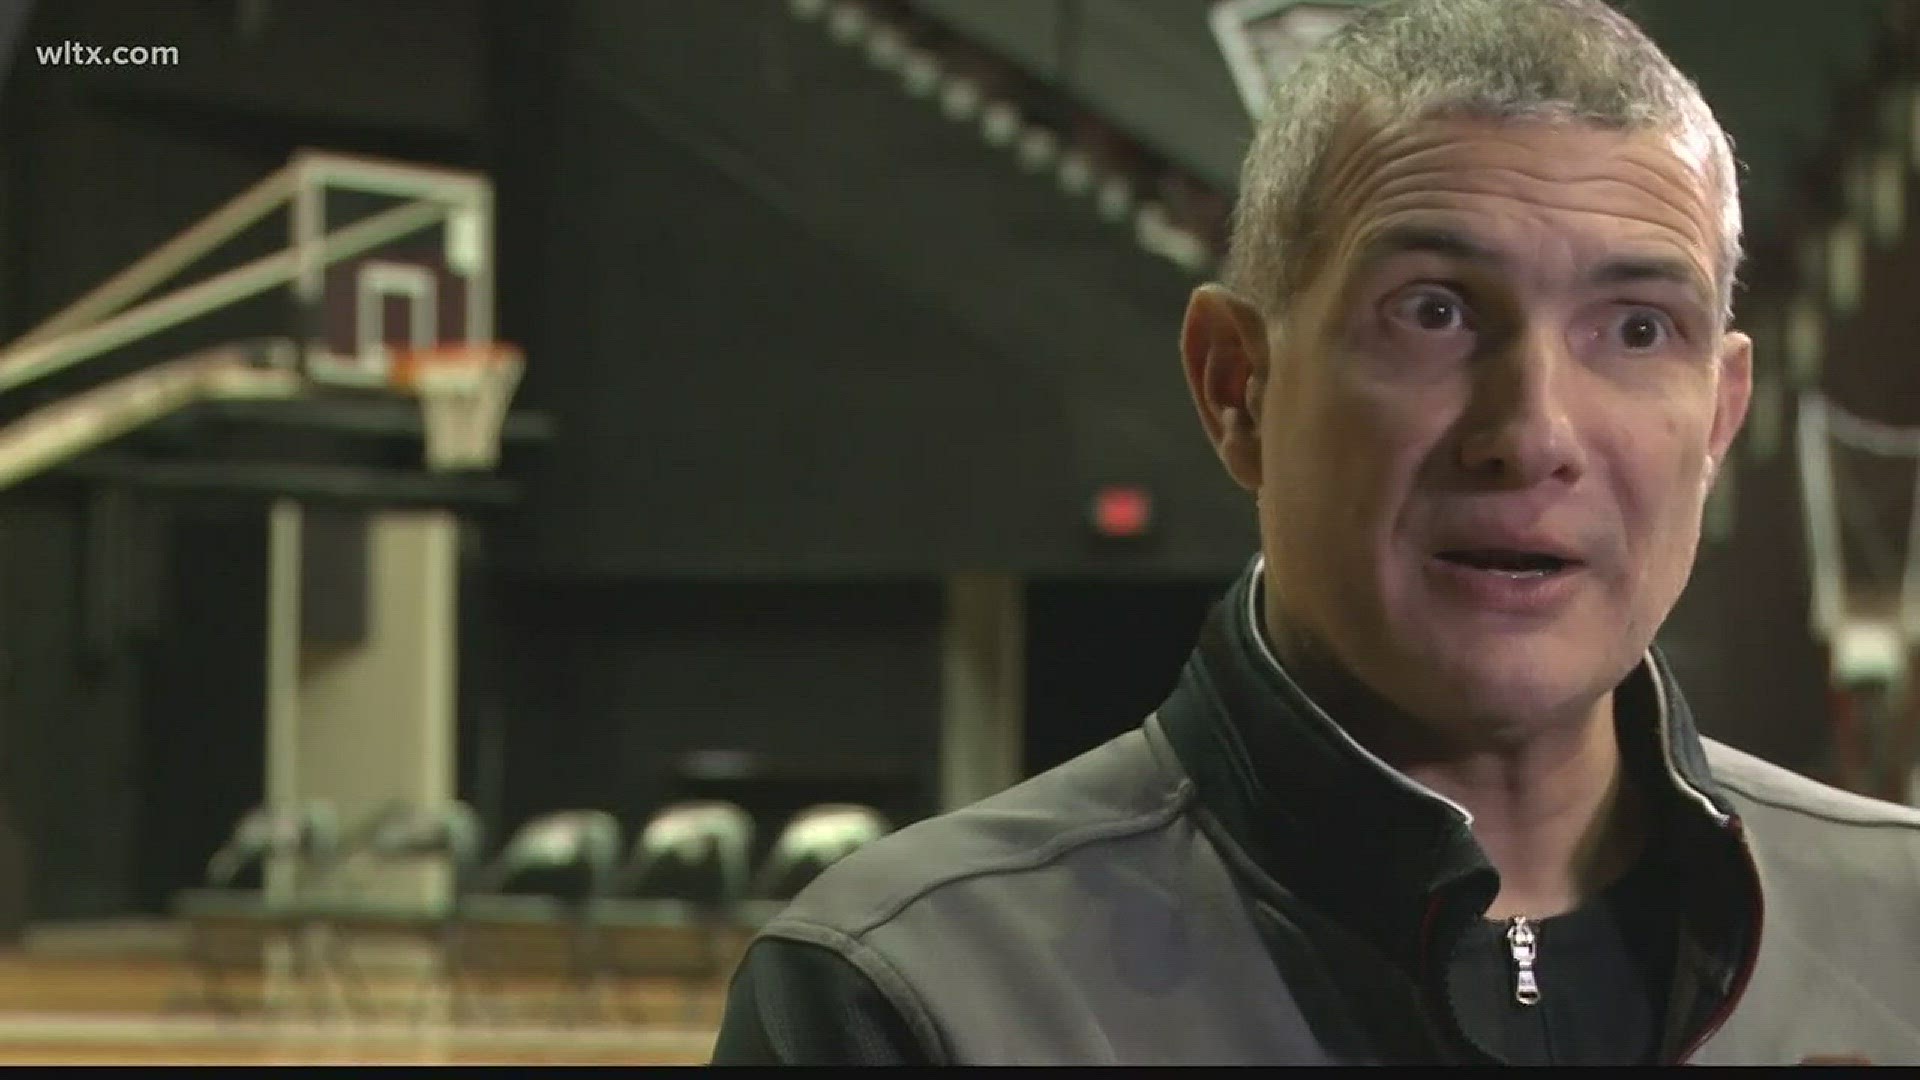 USC head basketball coach Frank Martin says a shot clock for high school players would provide multiple benefits.